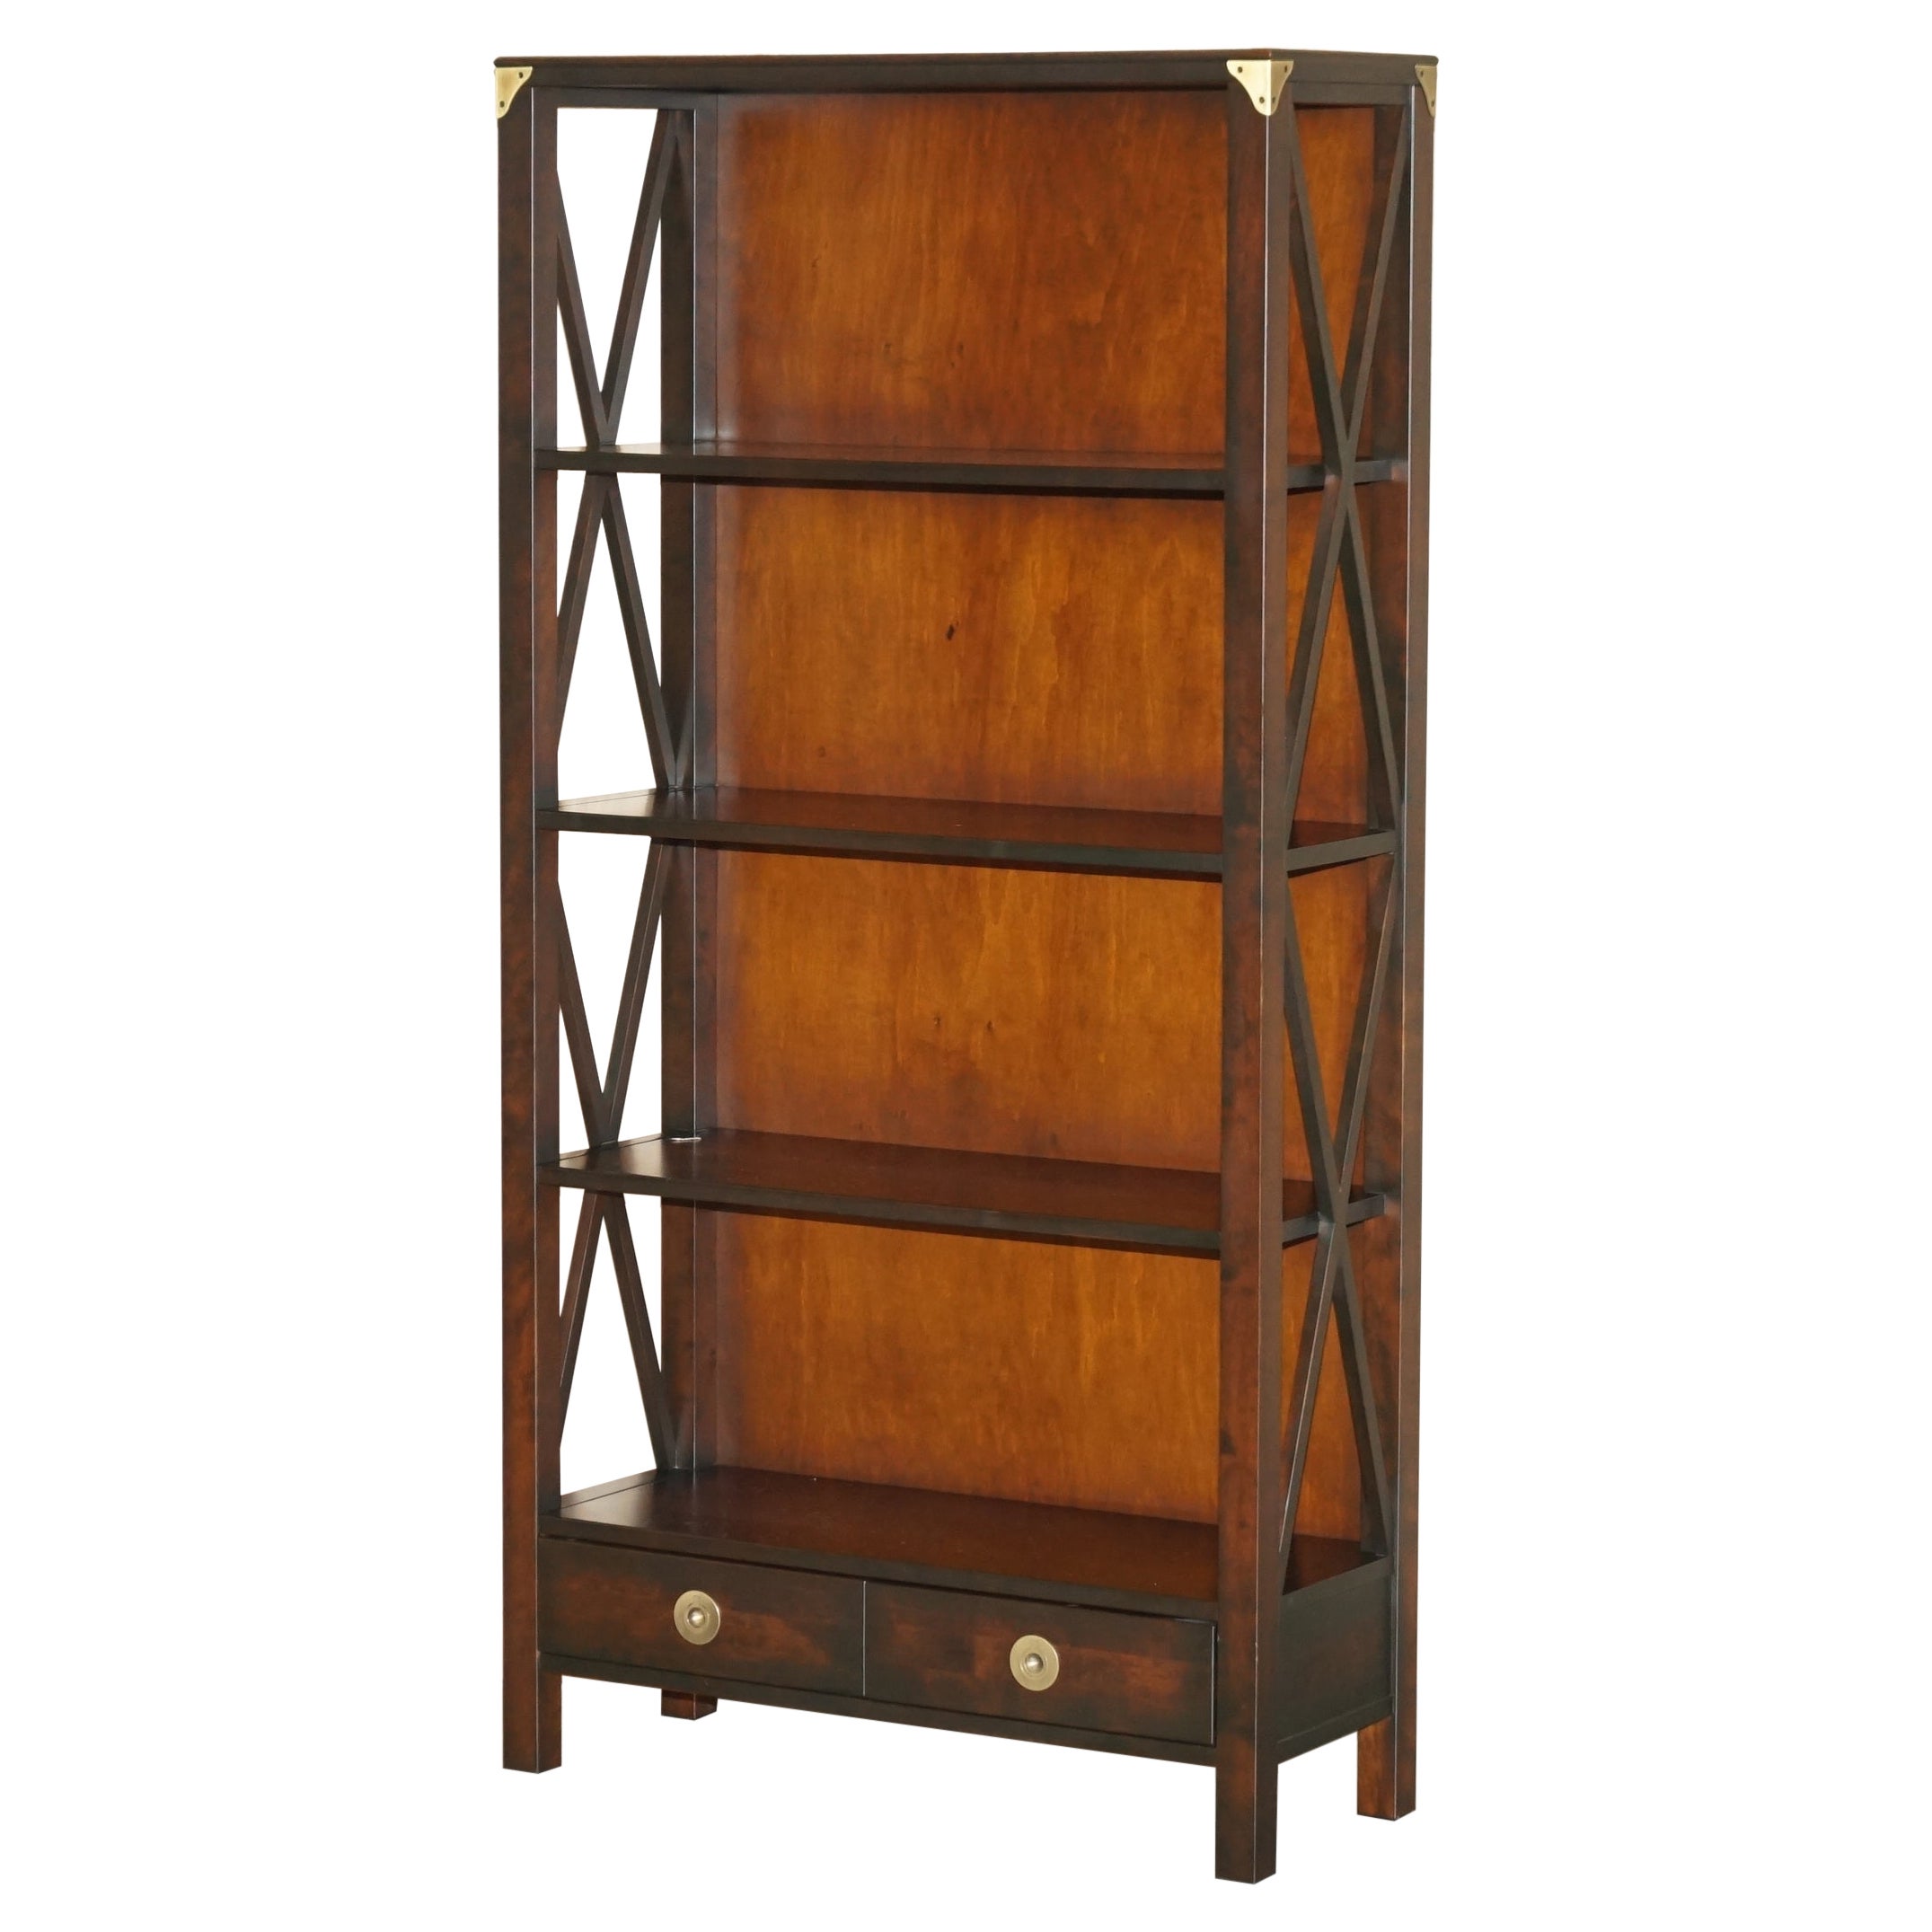 1 Of 2 Laura Ashley Hardwood and Brass Military Campaign Bookcases with Drawers